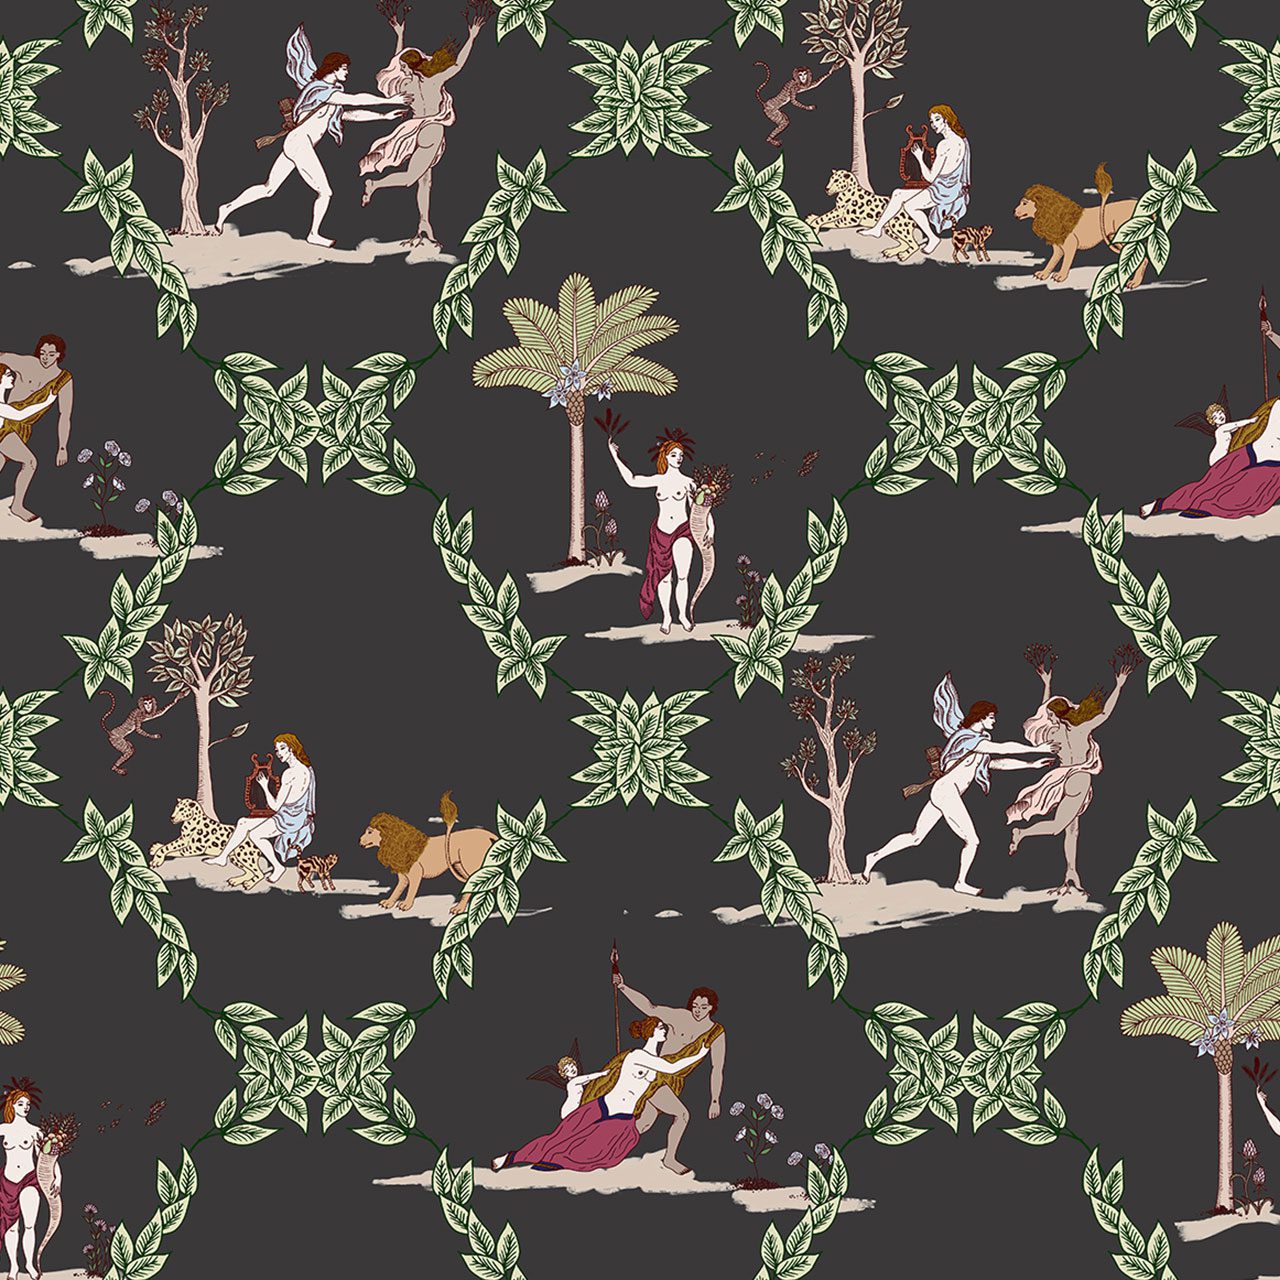 Bucolic Fabric, Wallpaper and Home Decor | Spoonflower